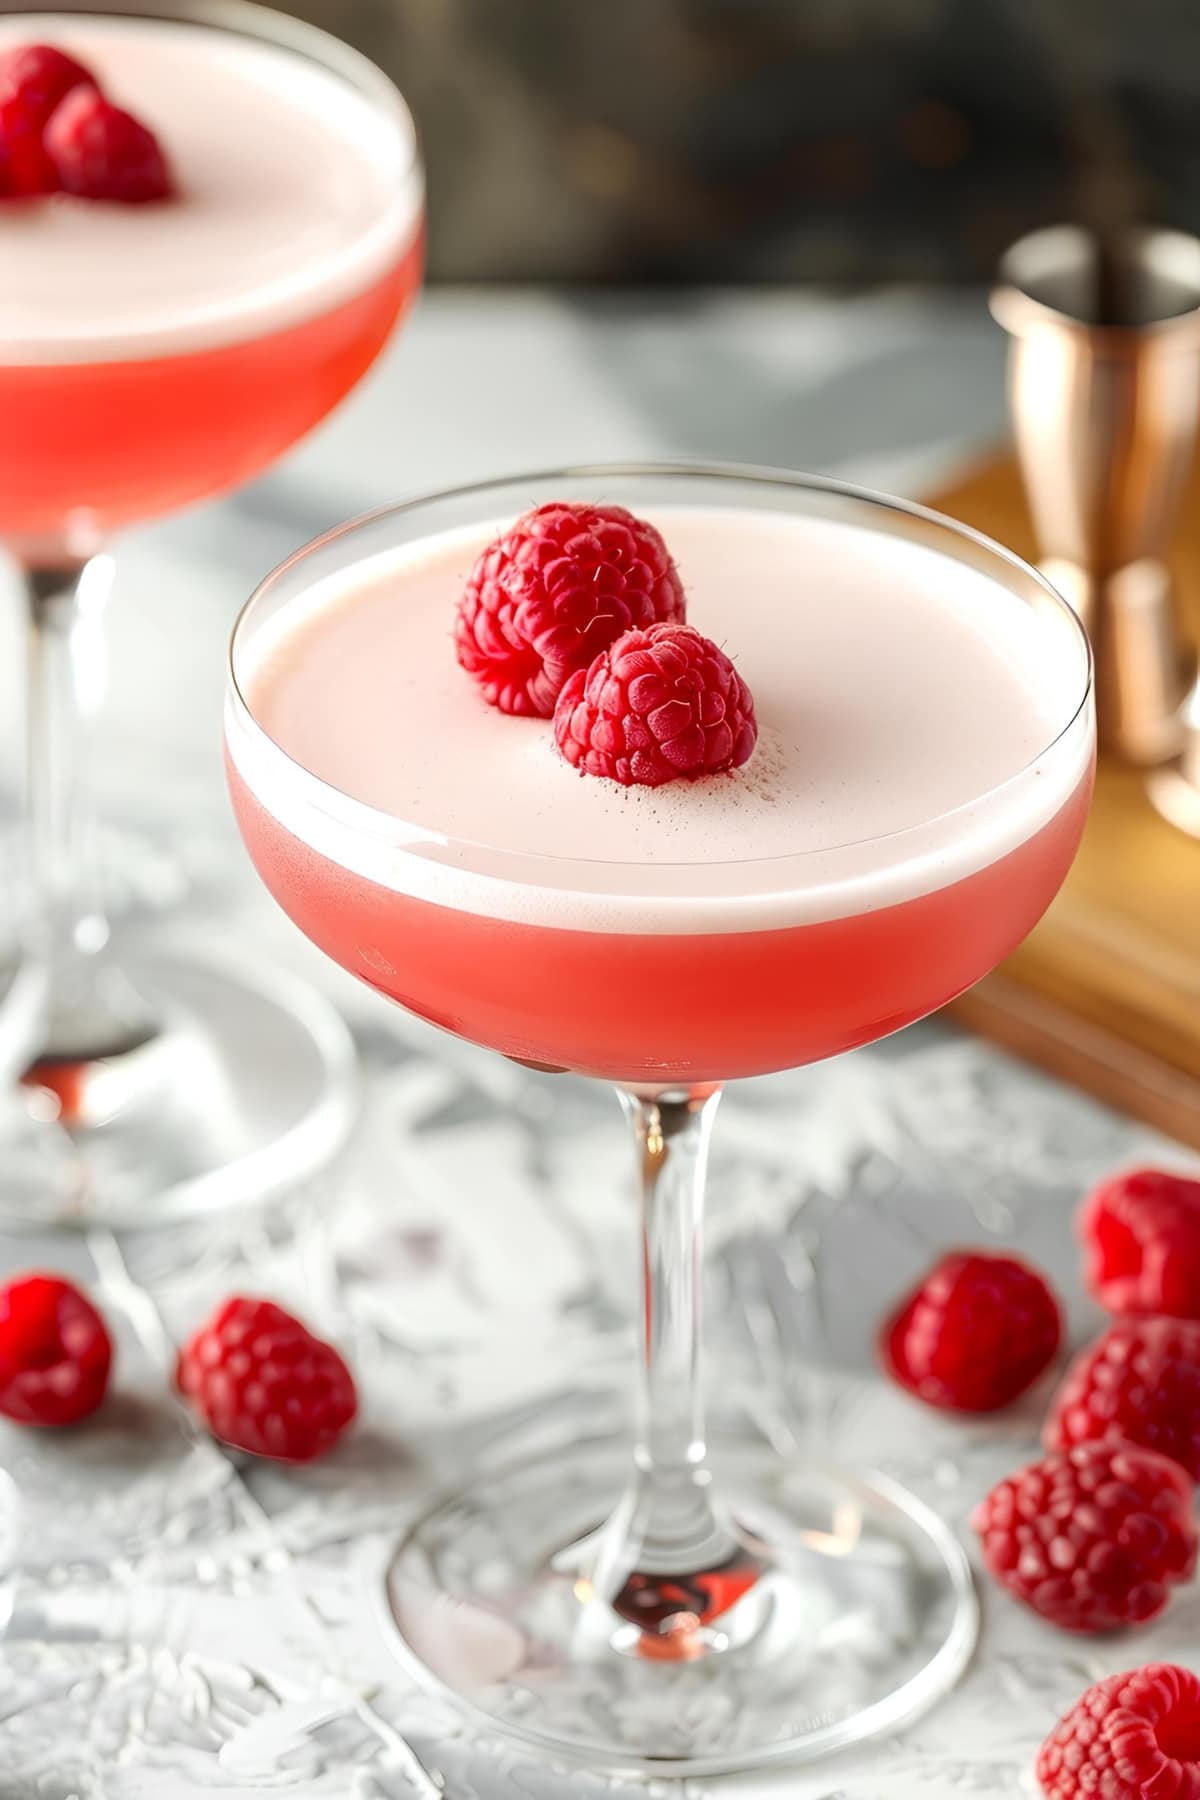 Boozy and fruity clover club cocktail topped with raspberries